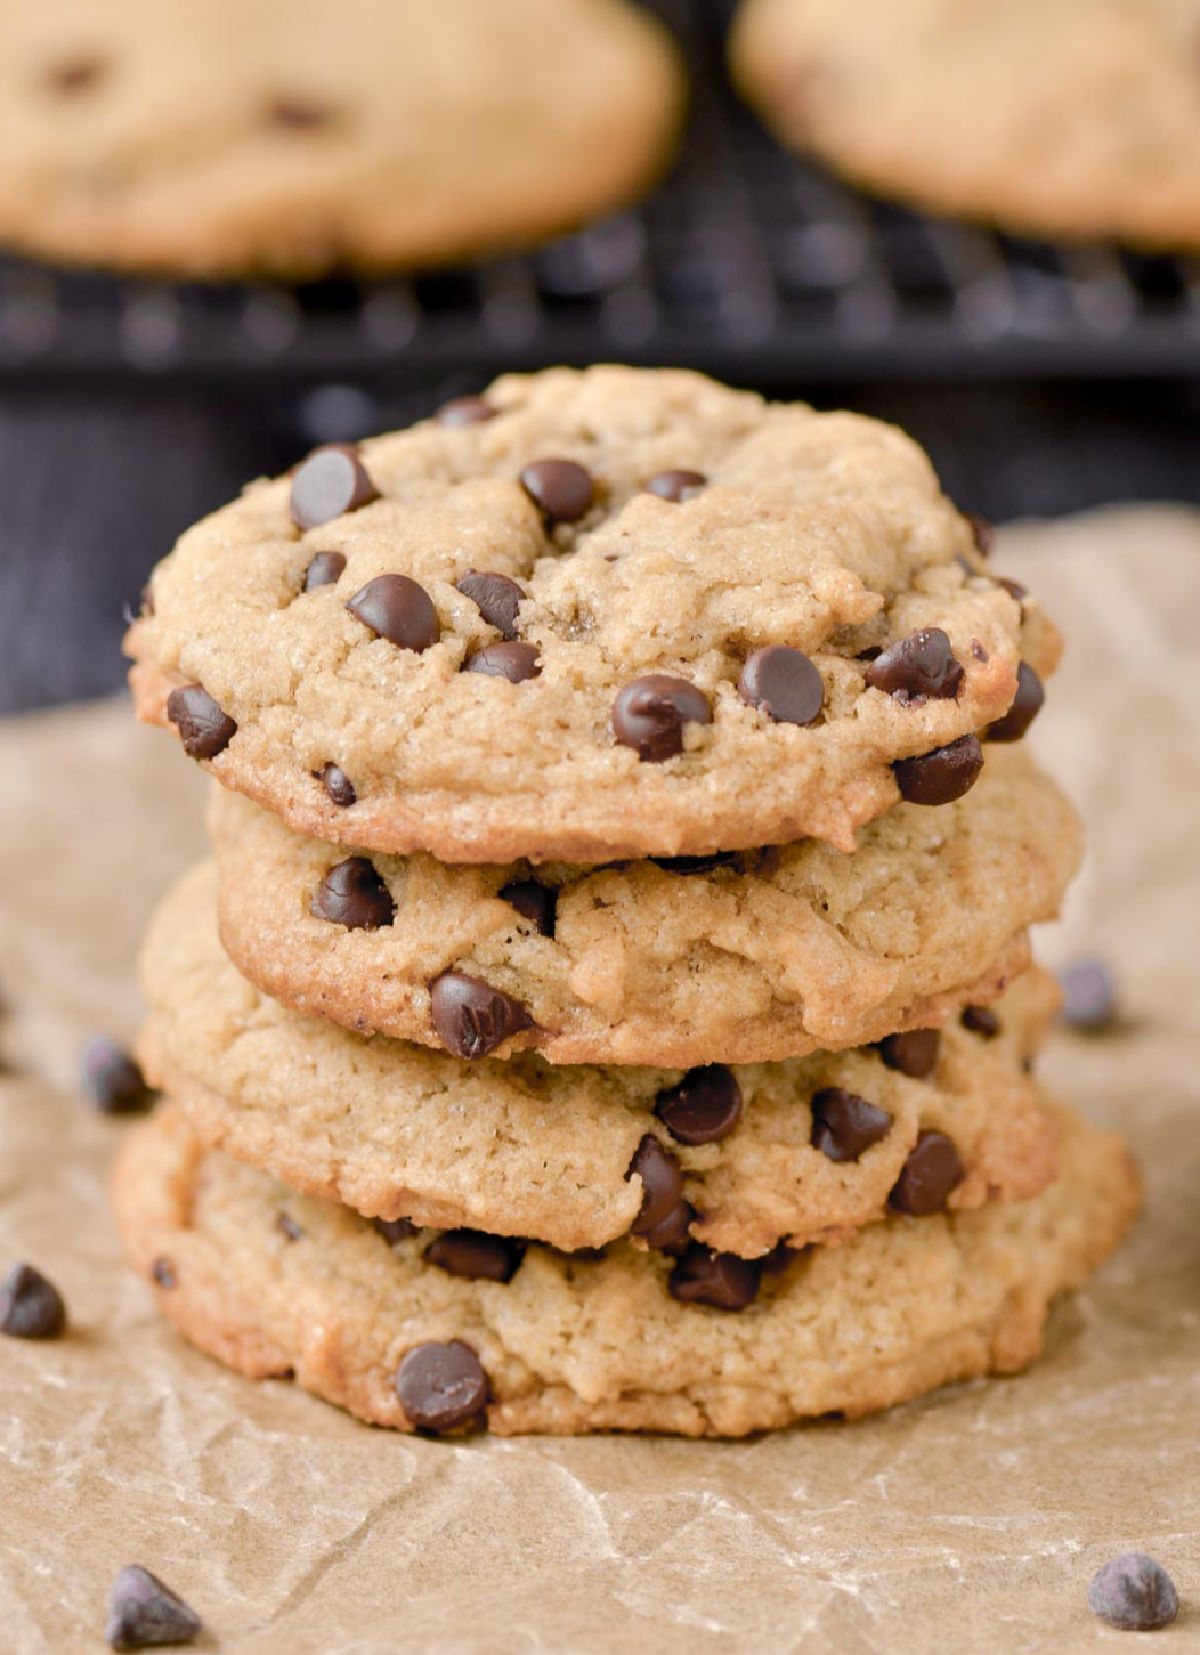 Chocolate Chip Cookies with Peanut Butter (Gluten-Free)